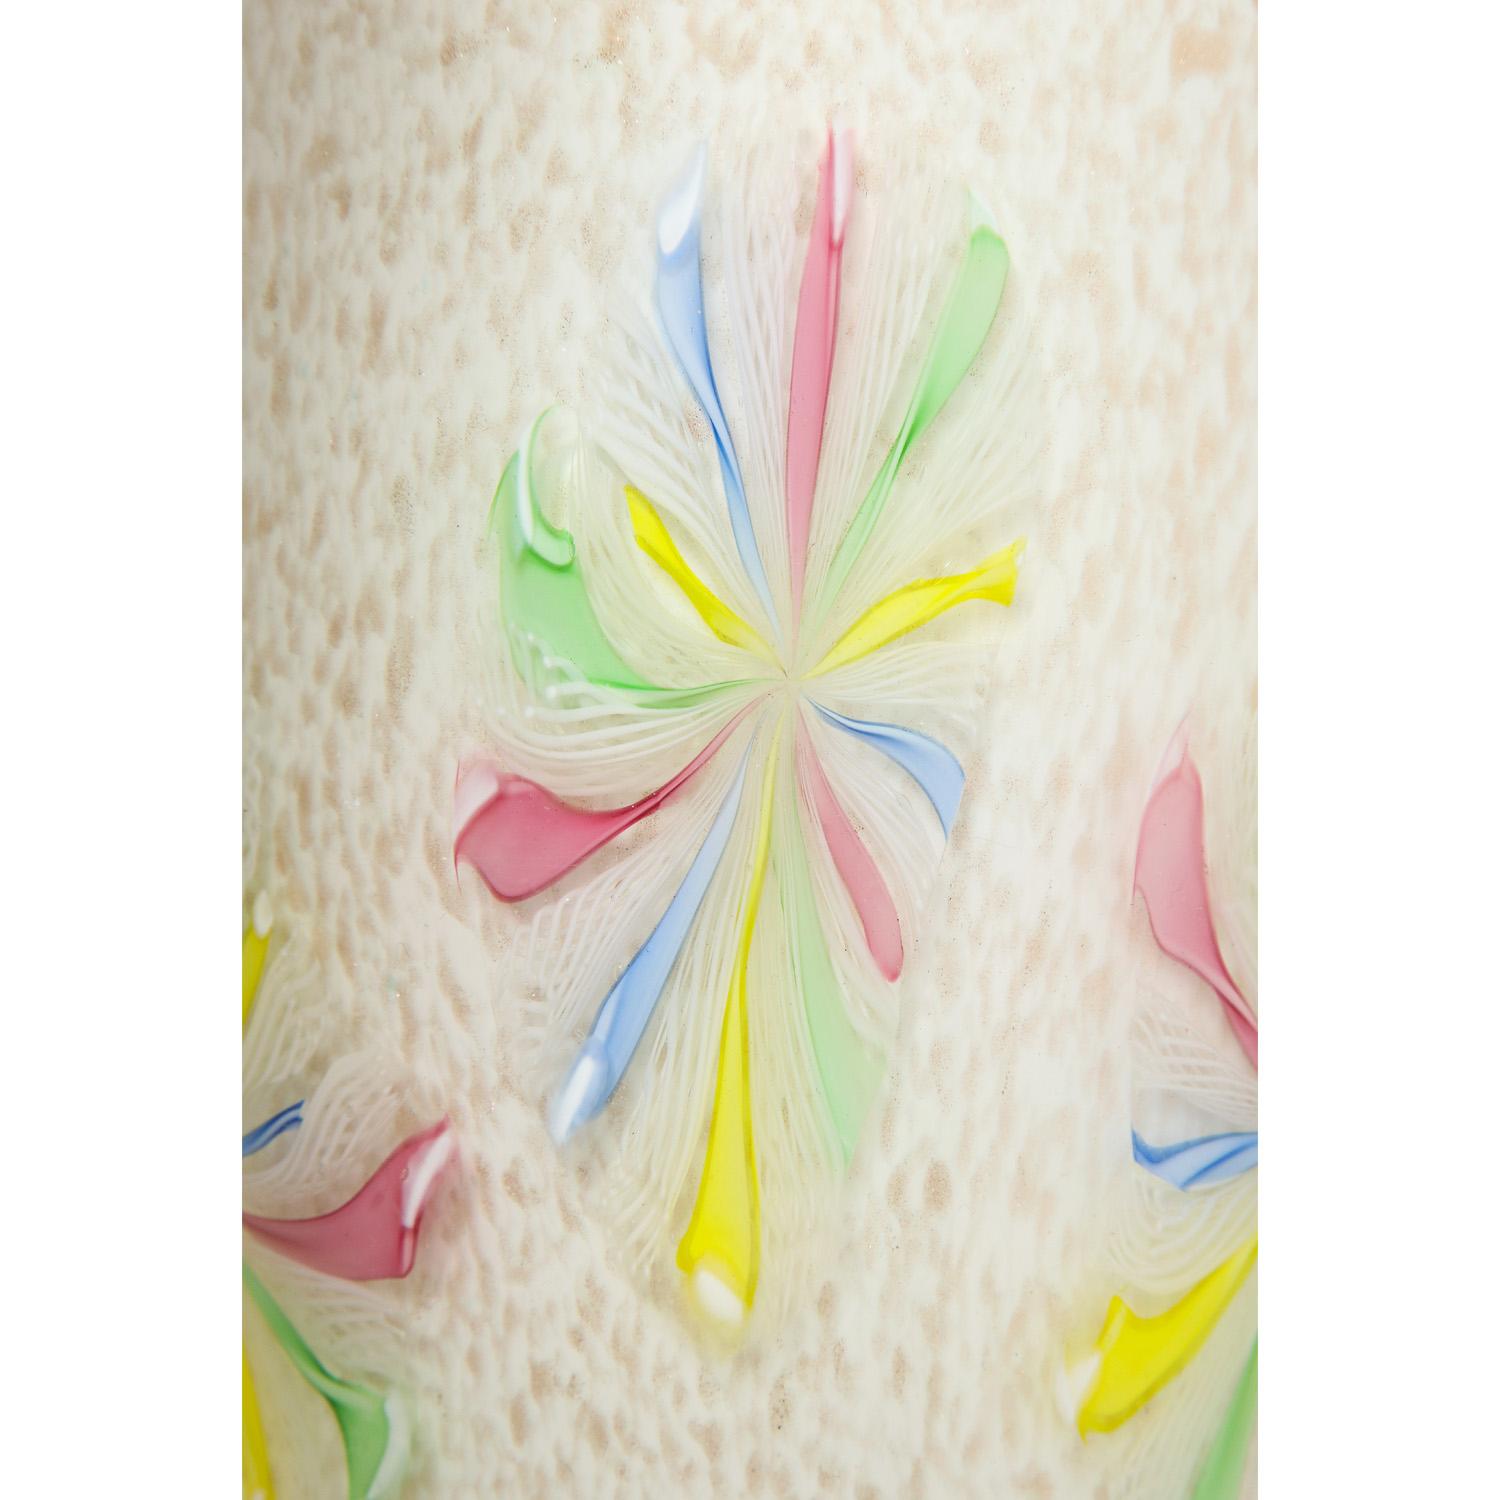 Italian A.V.E.M. Hand Blown Glass Vase with Colorful Starburst Murrhines, 1950s For Sale